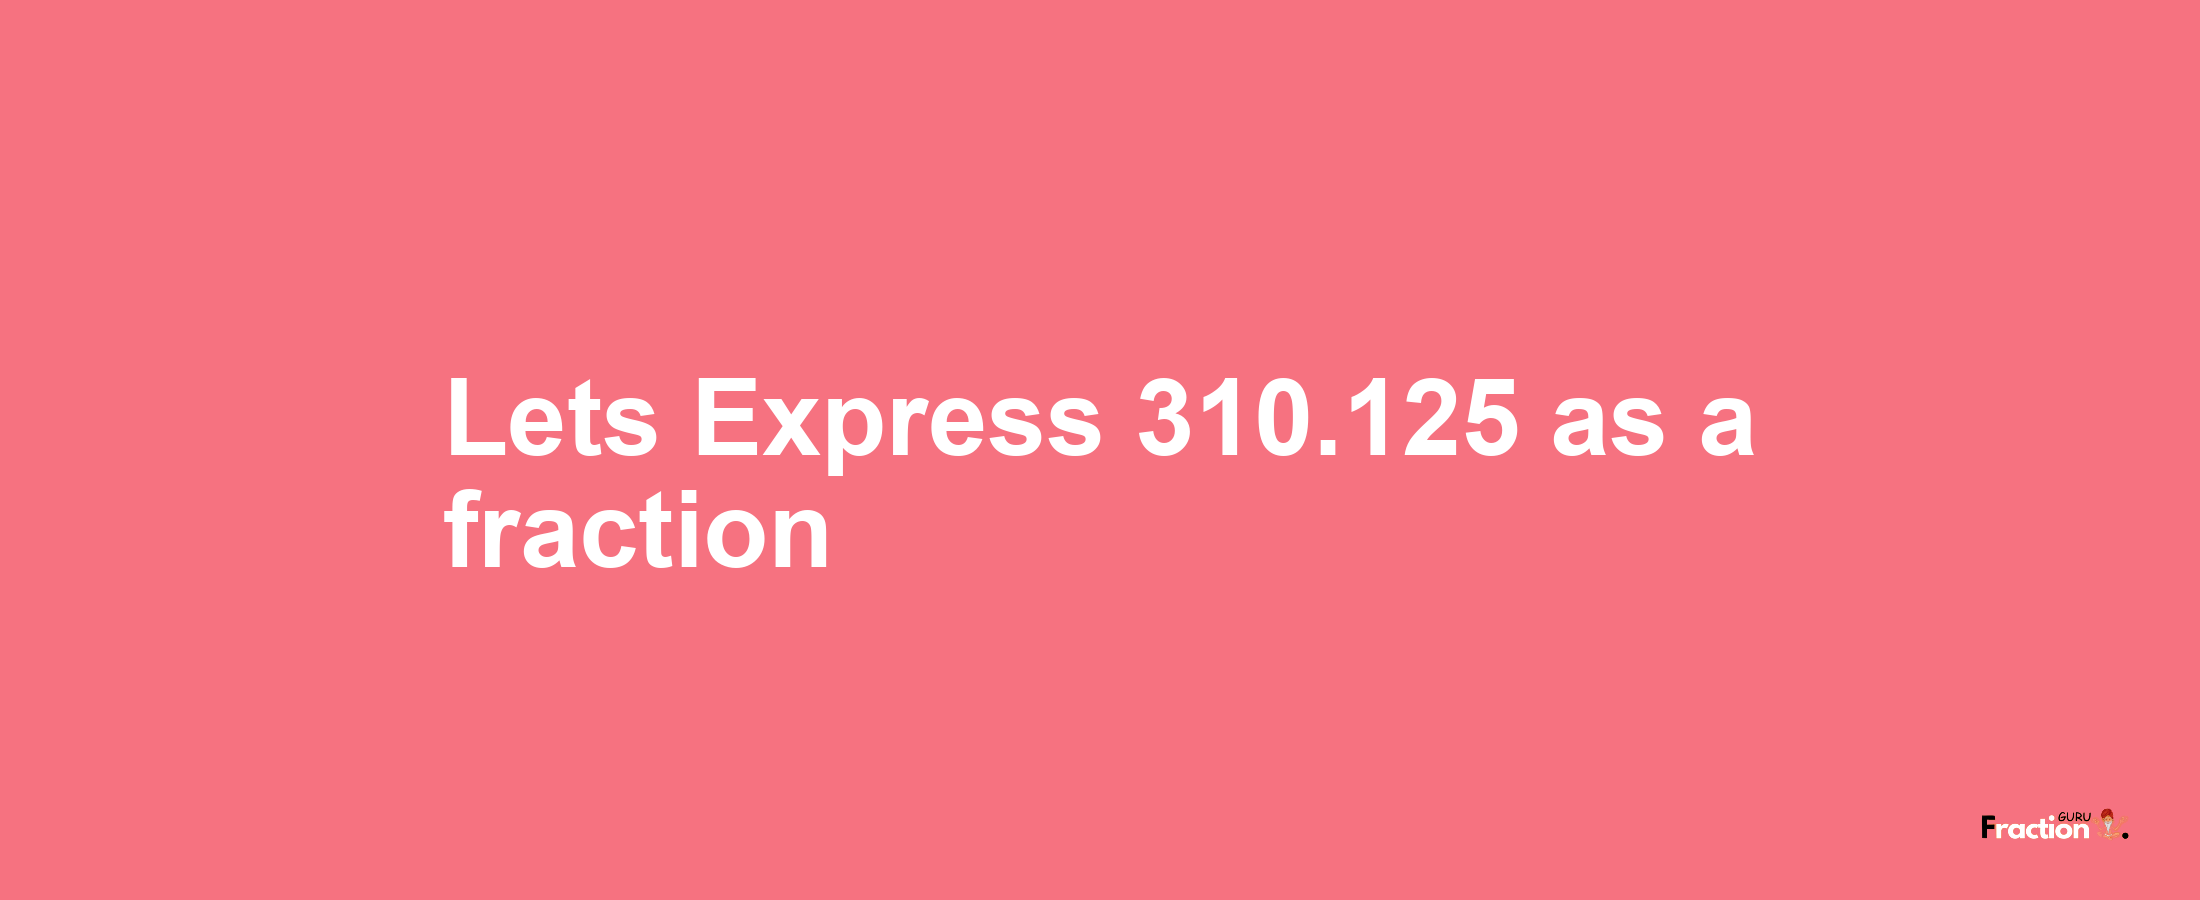 Lets Express 310.125 as afraction